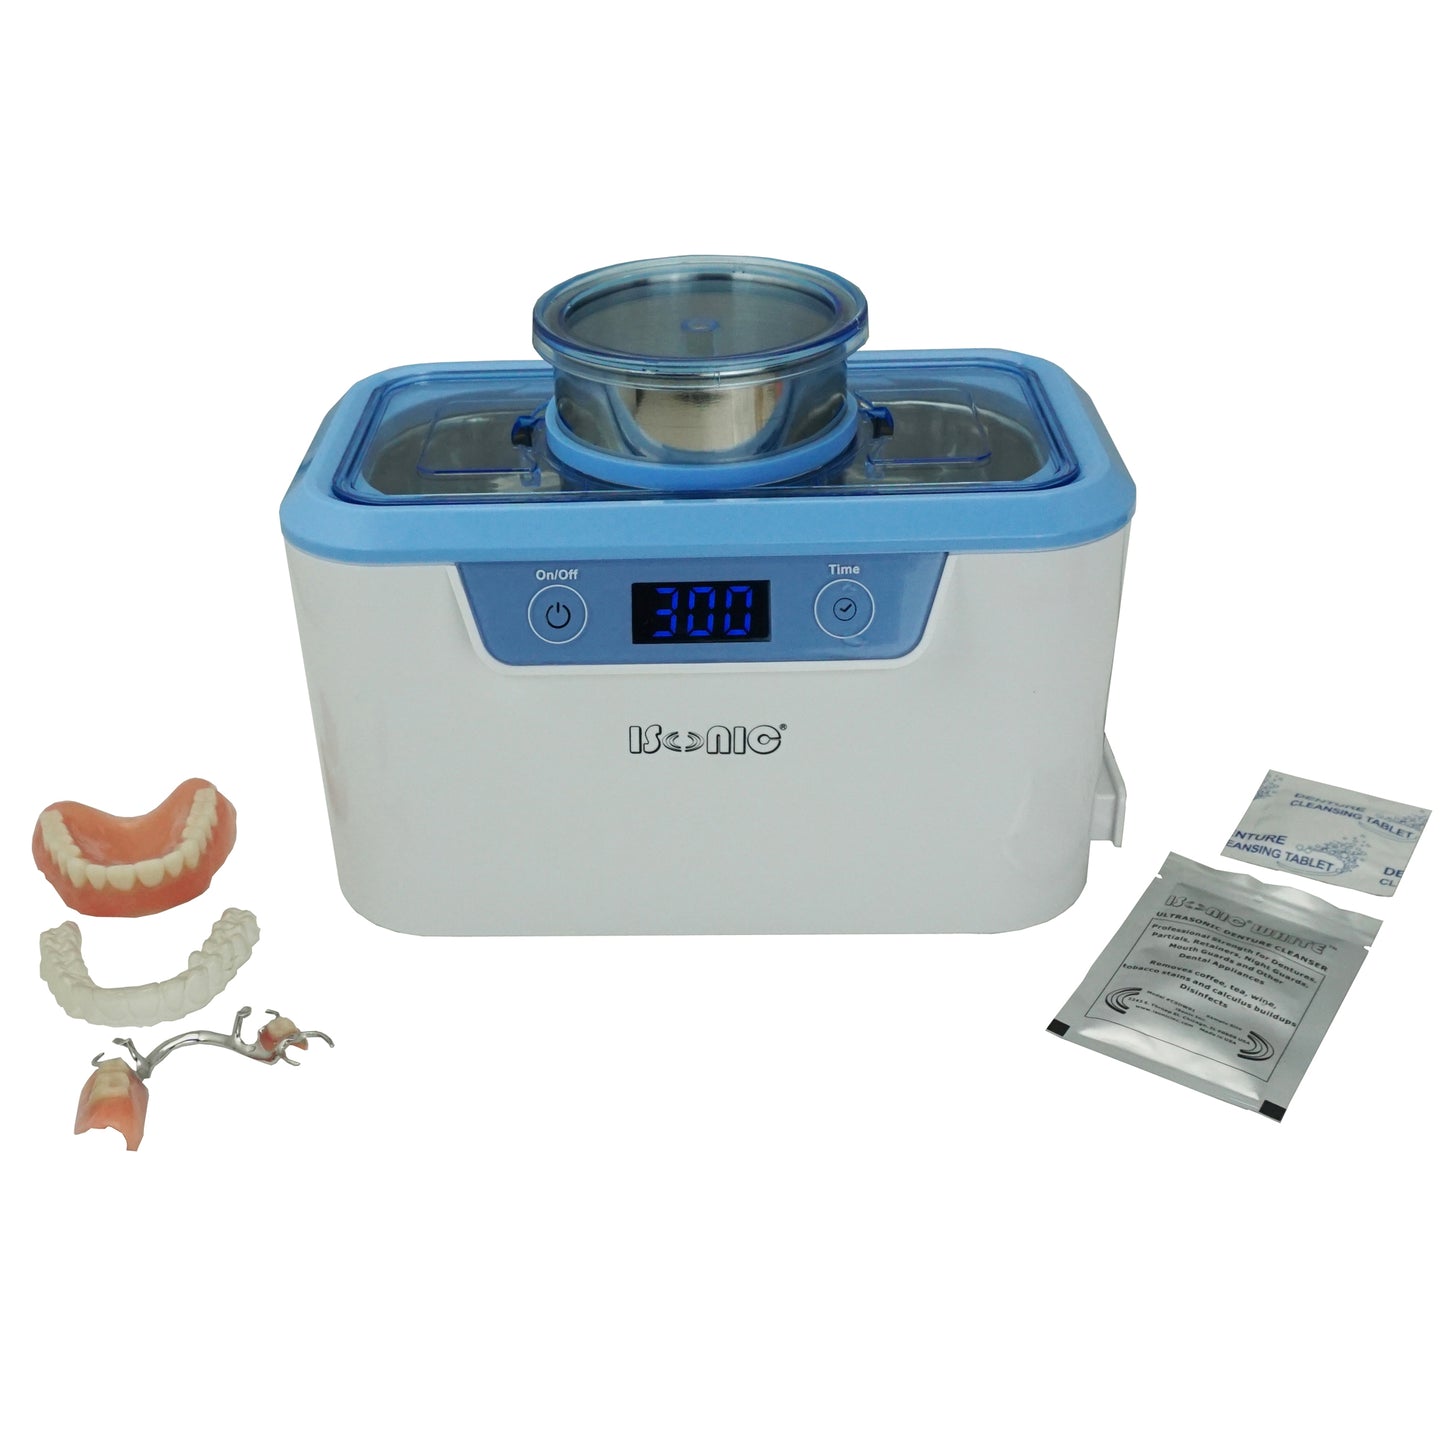 DS310-W | iSonic® Miniaturized Commercial Ultrasonic Cleaner, white color, for dental applications